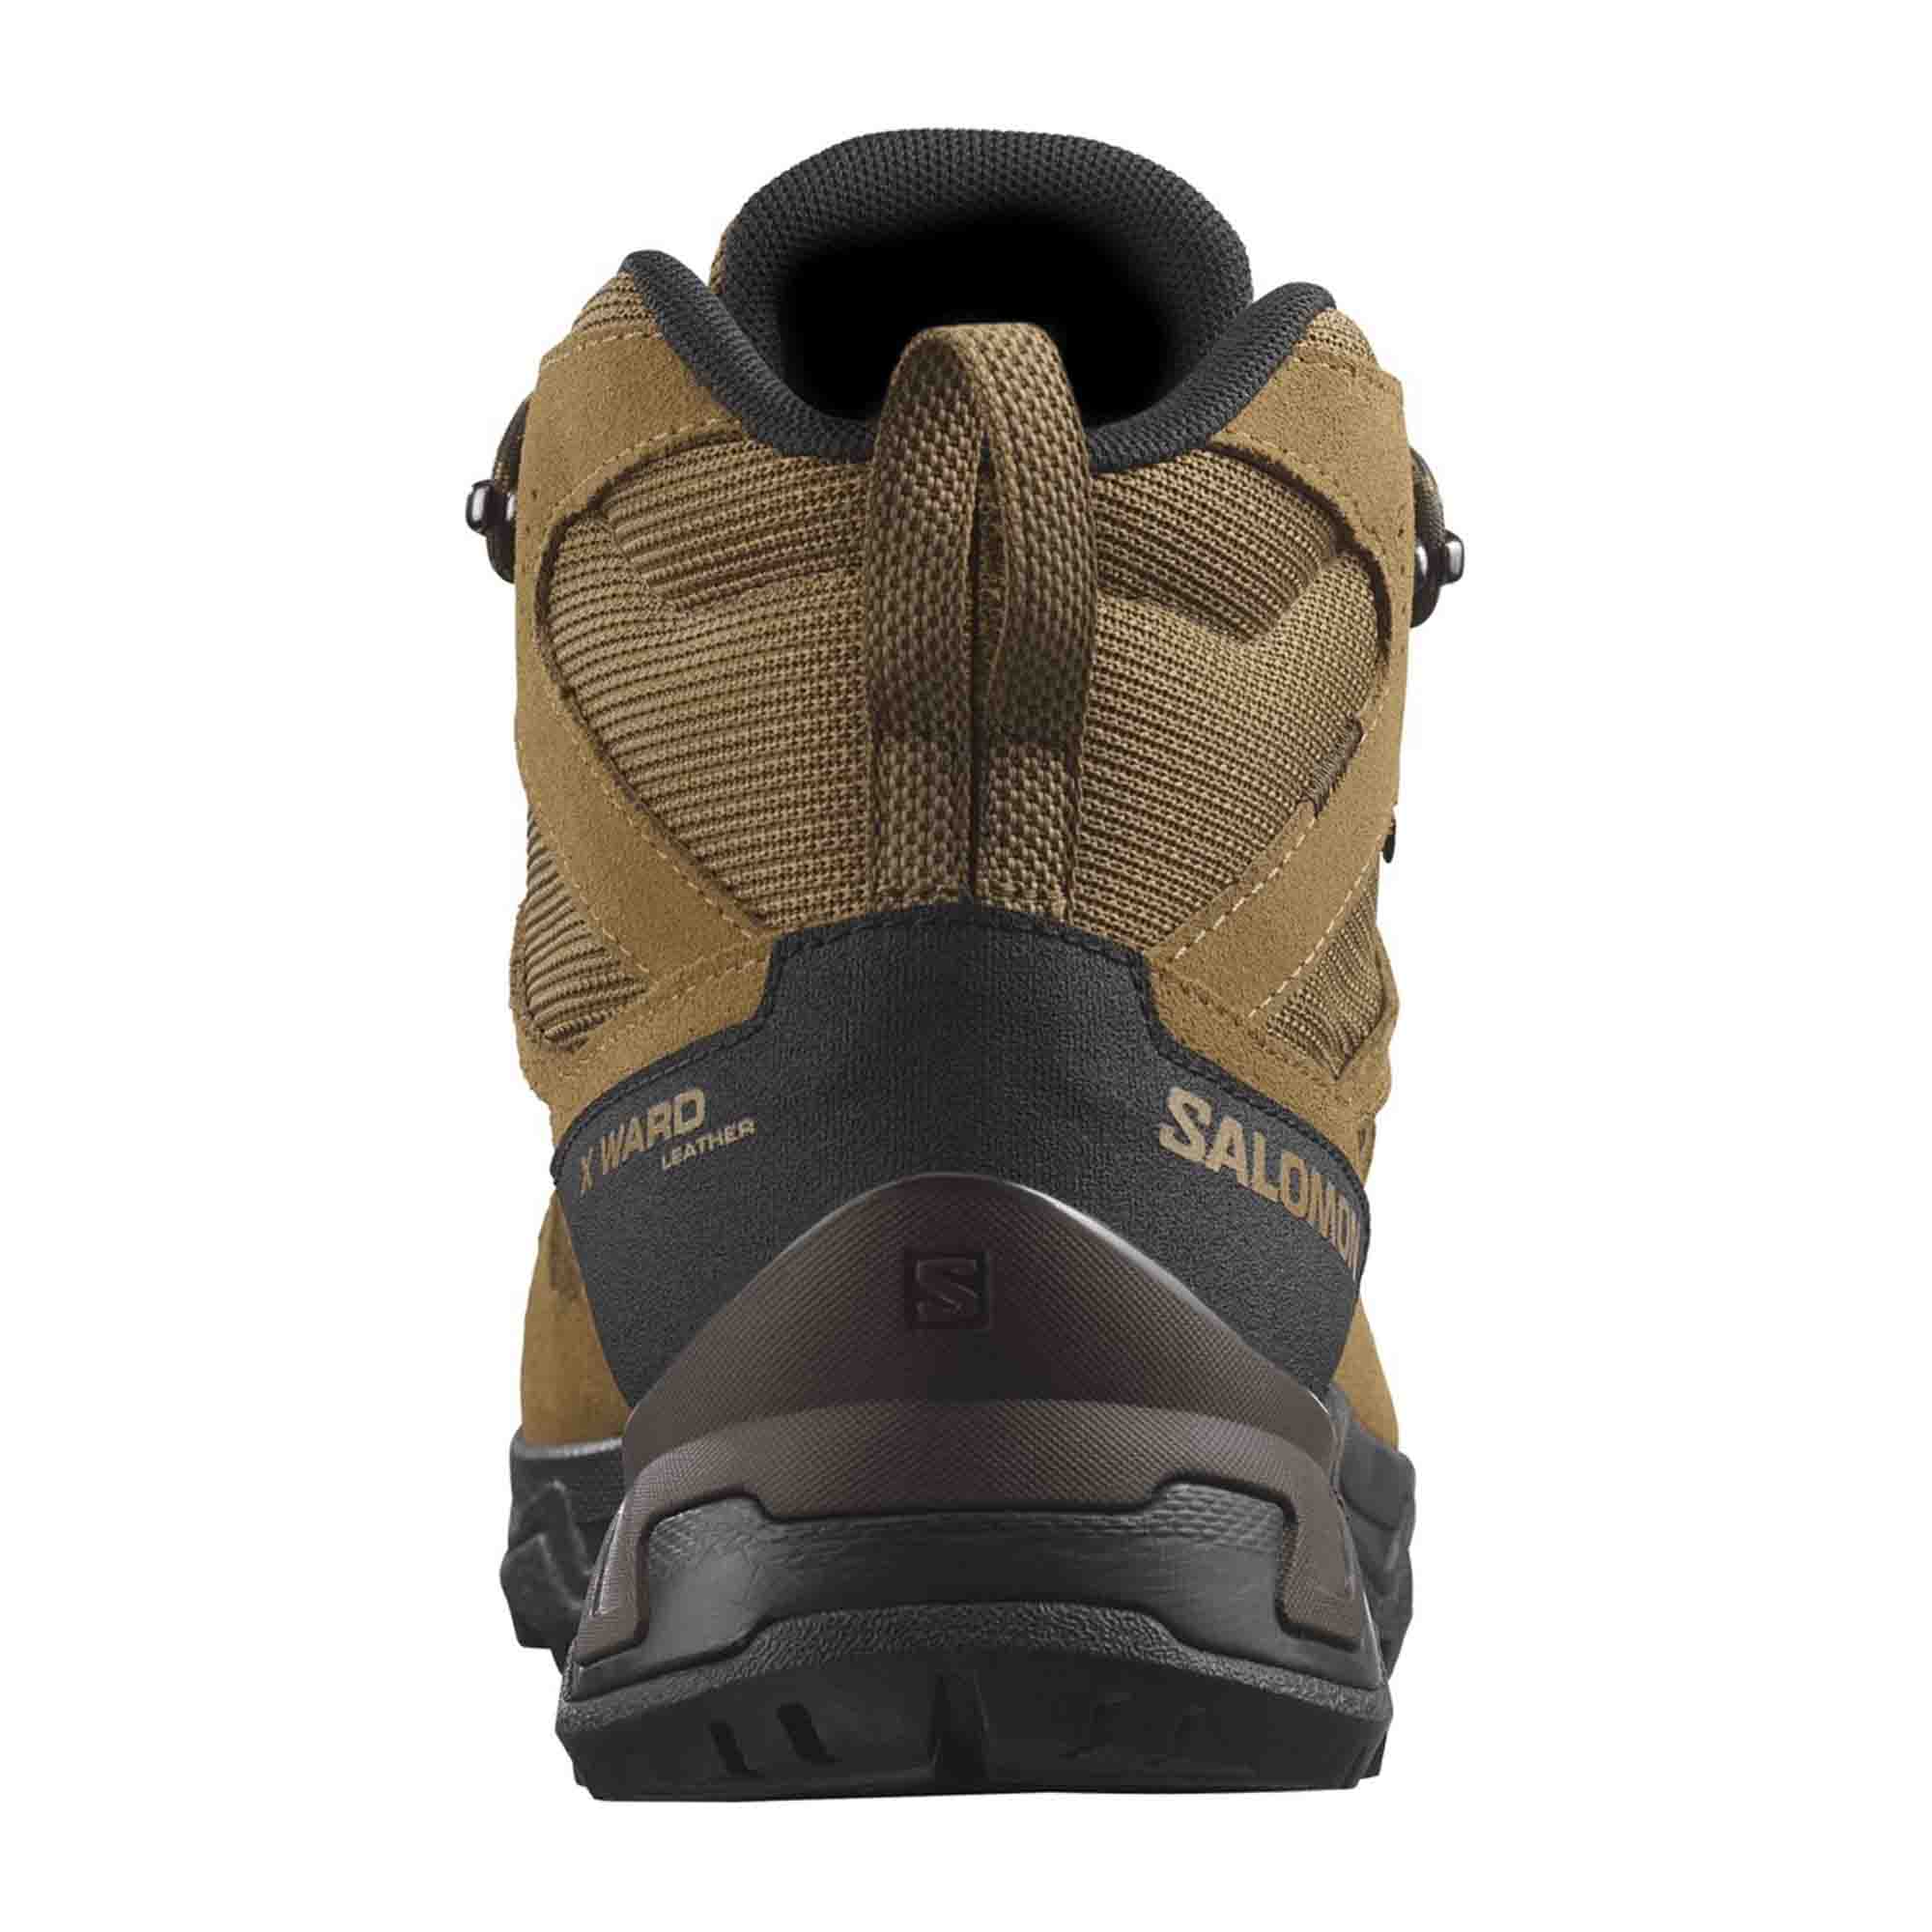 Salomon X WARD LEATHER MID GTX for men, brown, shoes